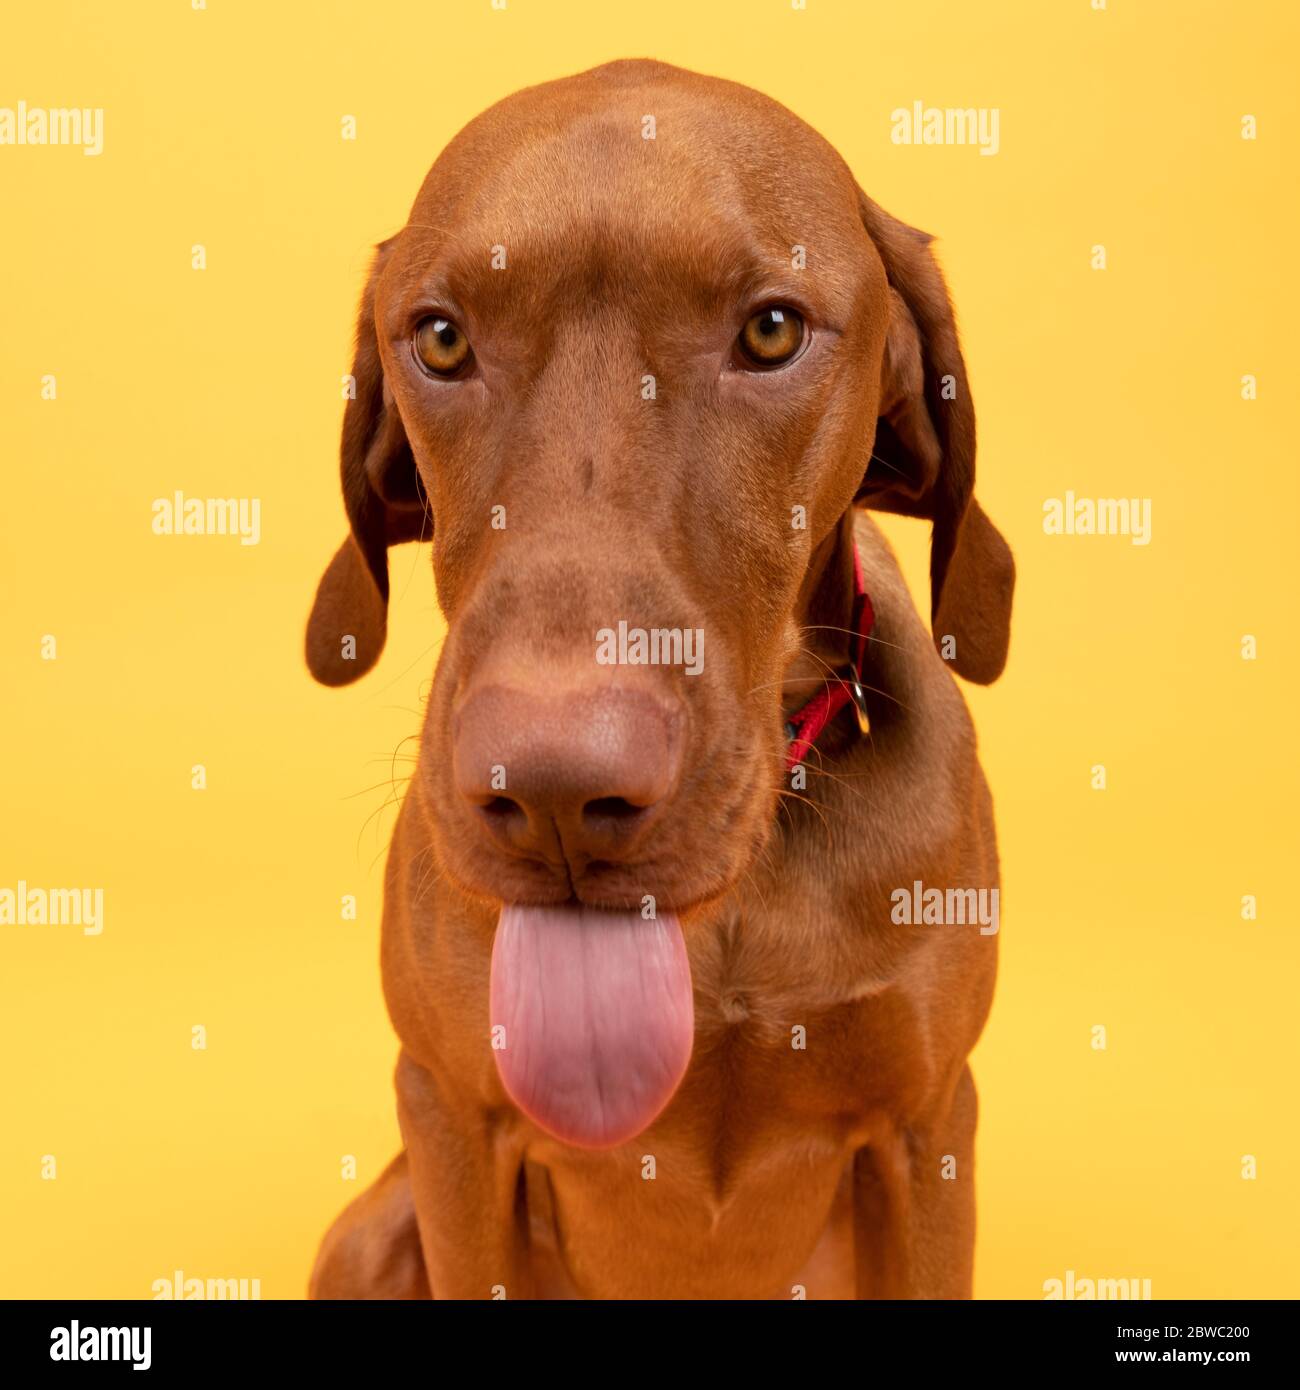 Funny hungarian vizsla dog headshot with tongue out front